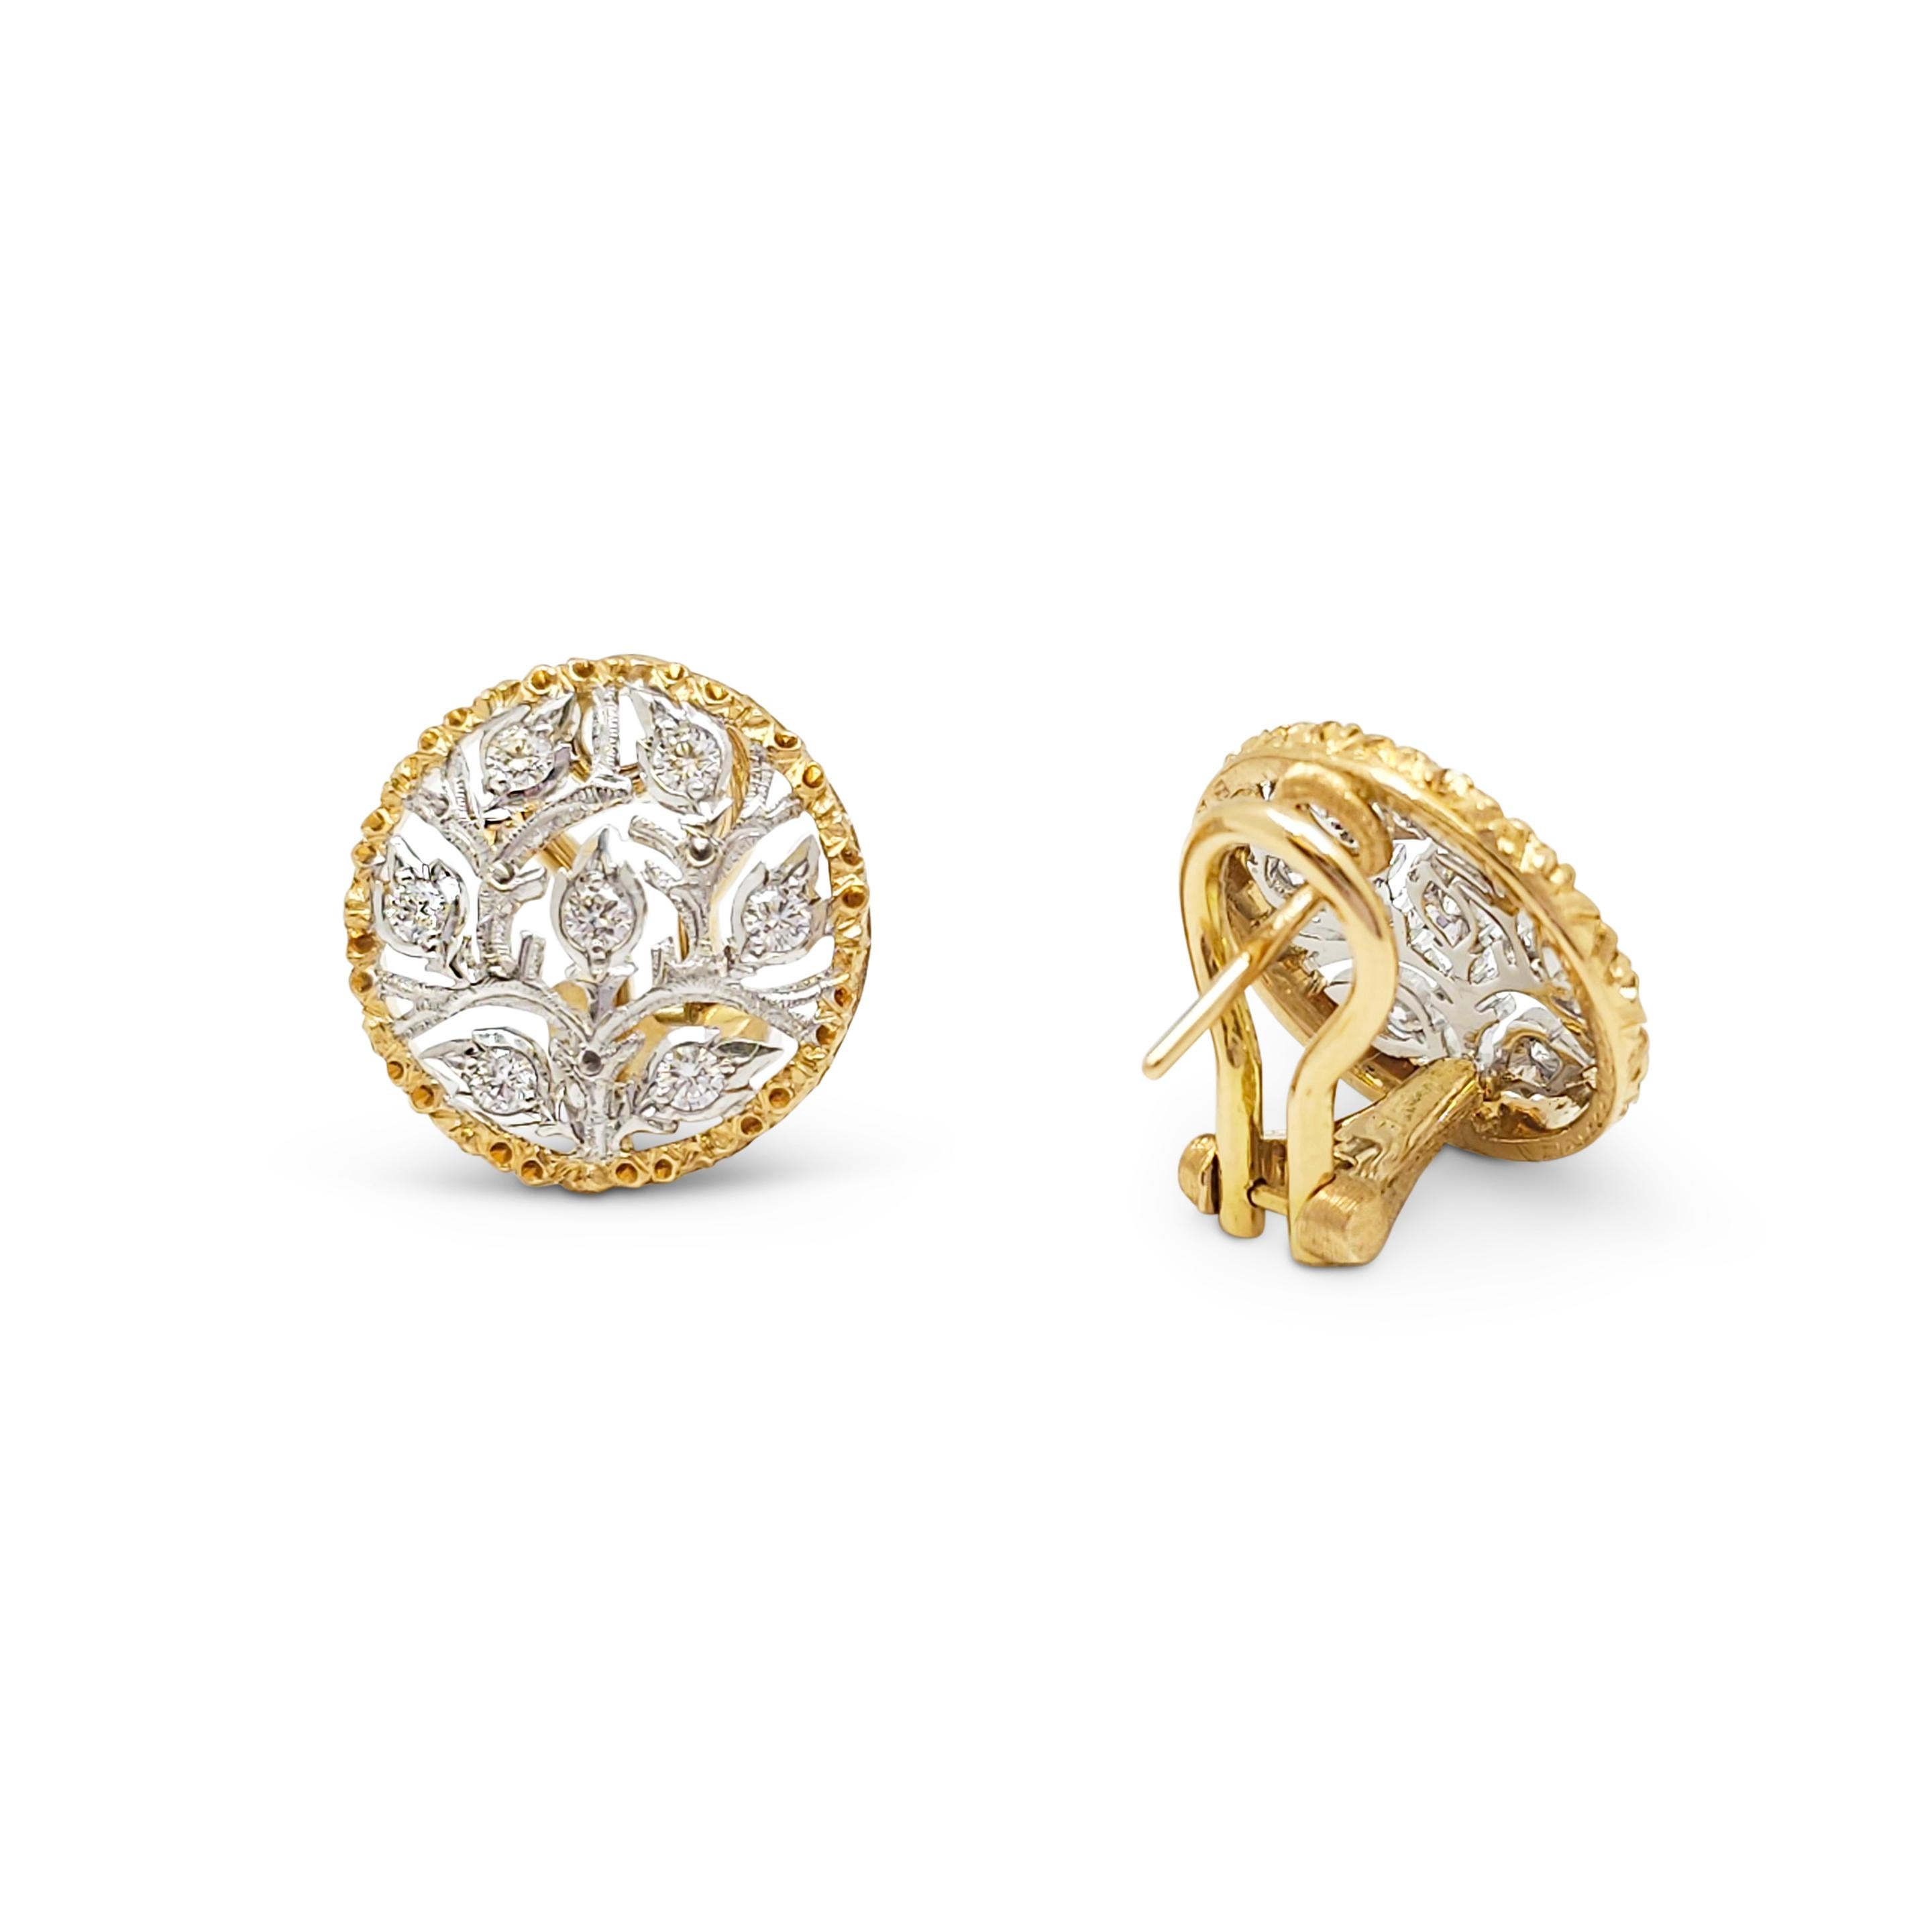 Authentic Buccellati Ramage earrings crafted in 18 karat textured yellow and white gold. The foliate design is set with approximately .40 total carats of round brilliant cut diamonds. The earrings measure .64 inches in diameter. Signed Buccellati,